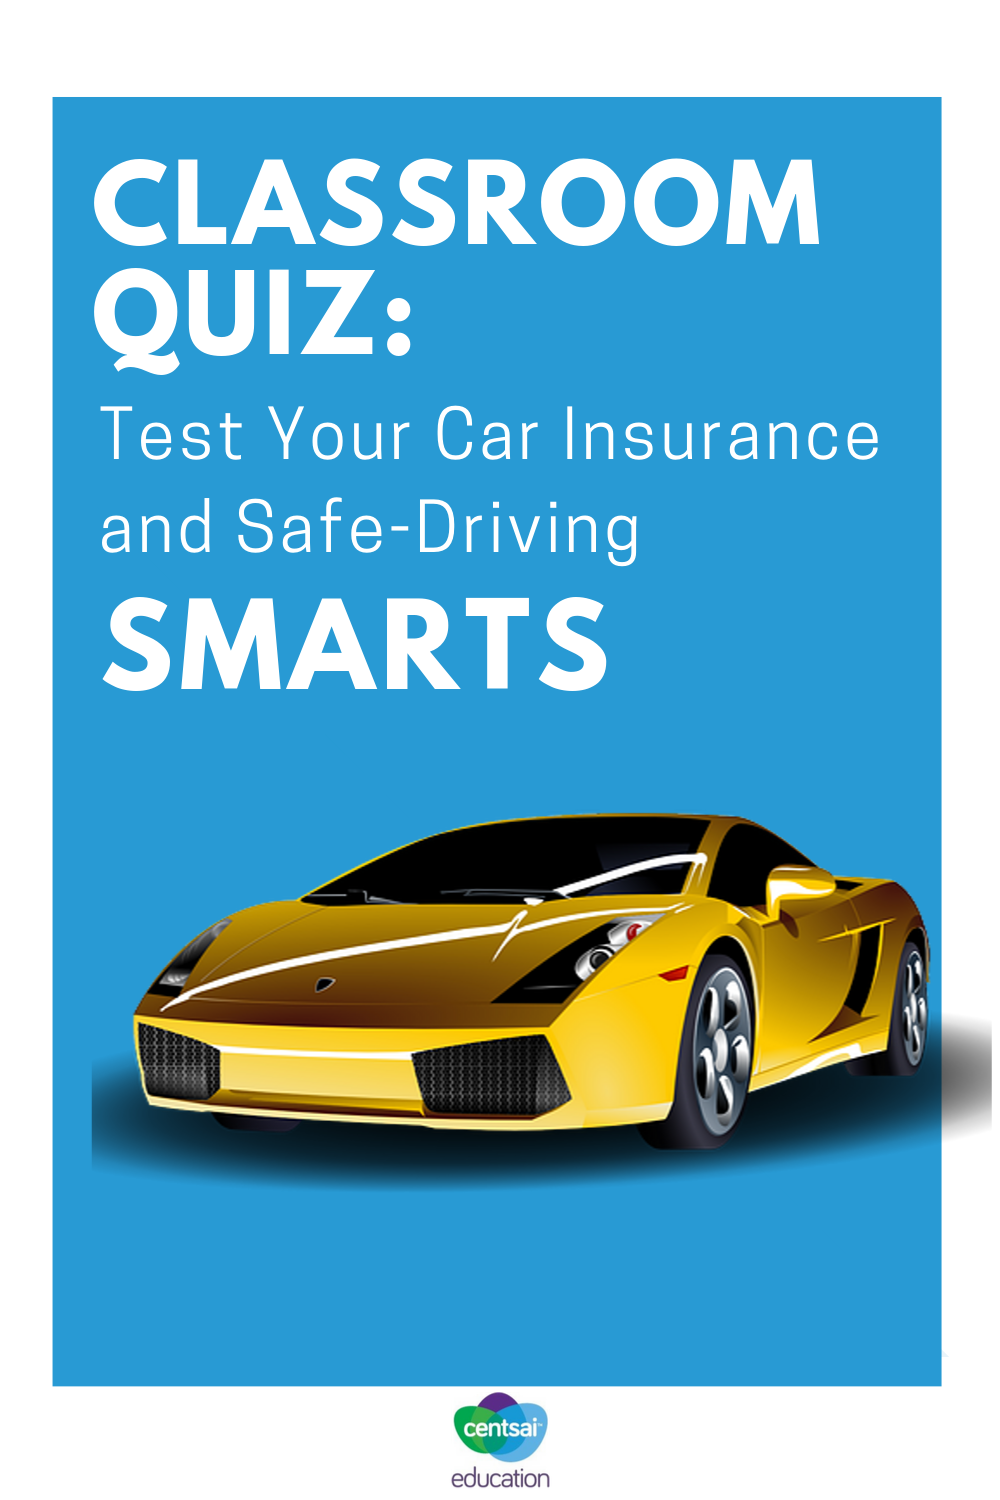 Any of your students driving? Test their car insurance know-how. #carinsurance #insurance #lifeinsurance #driving